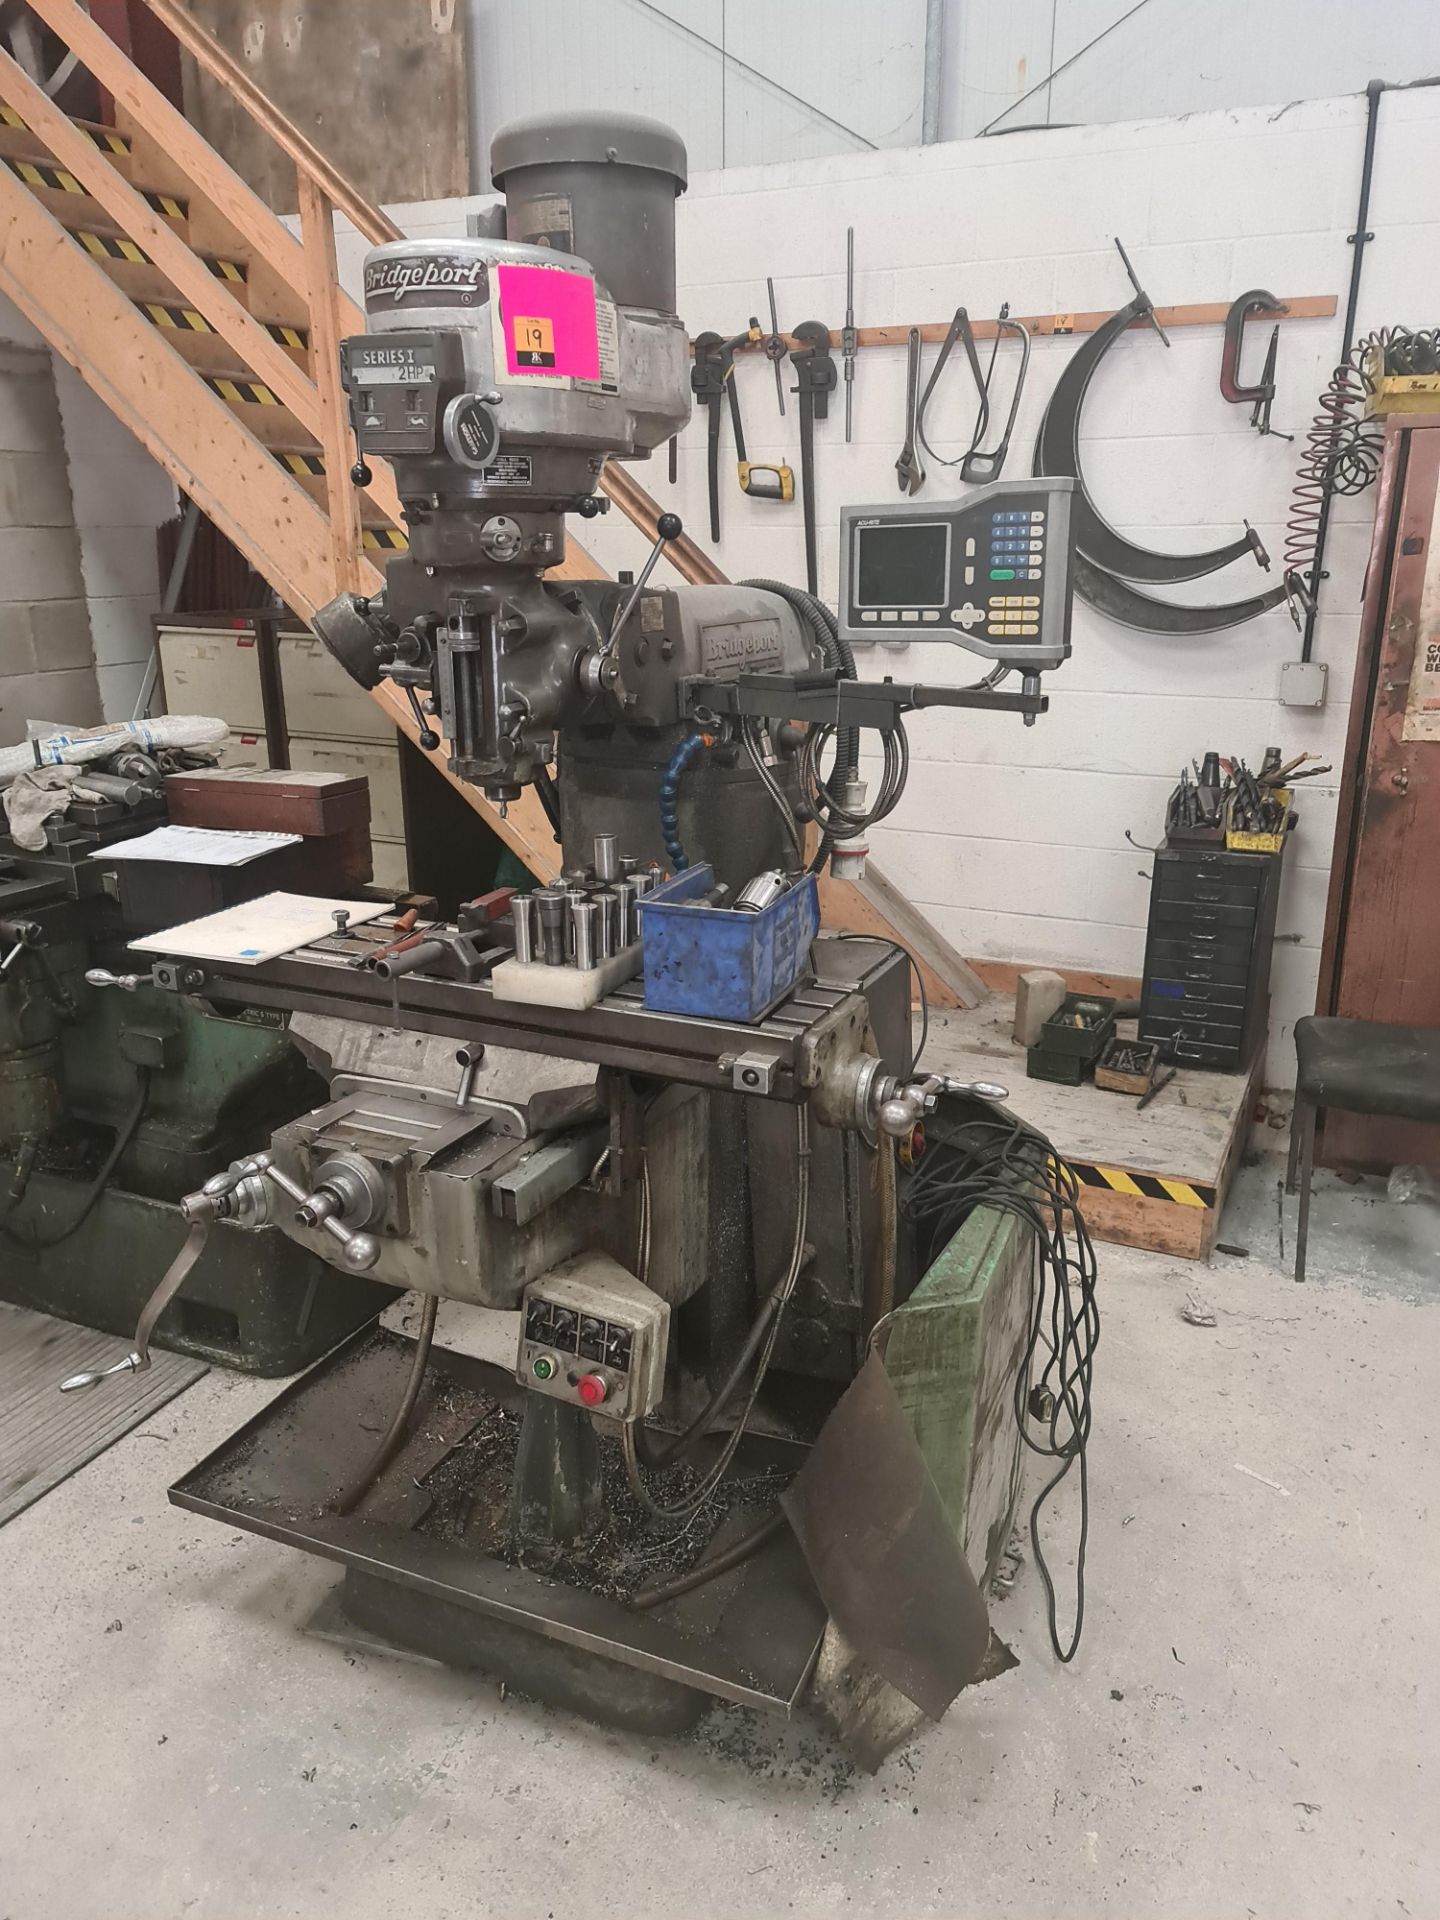 Bridgeport series 1 2hp turret mill with Acu-Rite DRO. Includes the tooling located on the machine